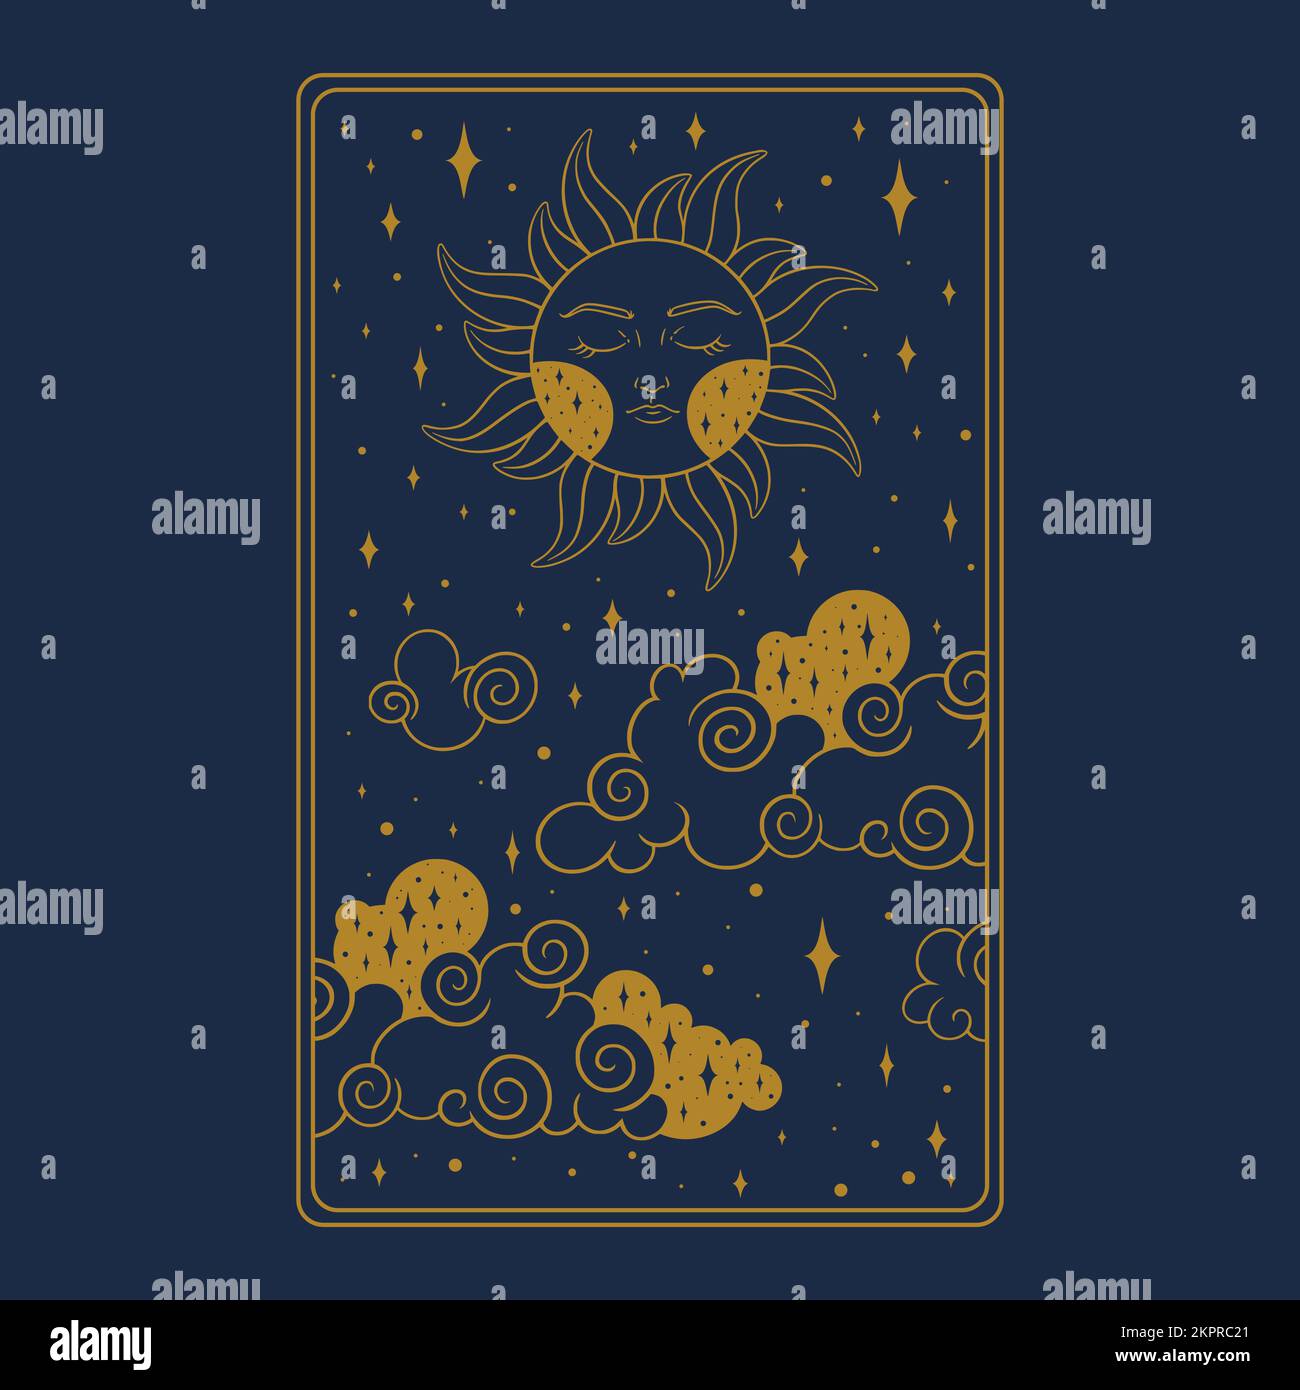 Tarot aesthetic golden card. Occult tarot design for oracle card covers. Vector illustration isolated in blue background Stock Vector